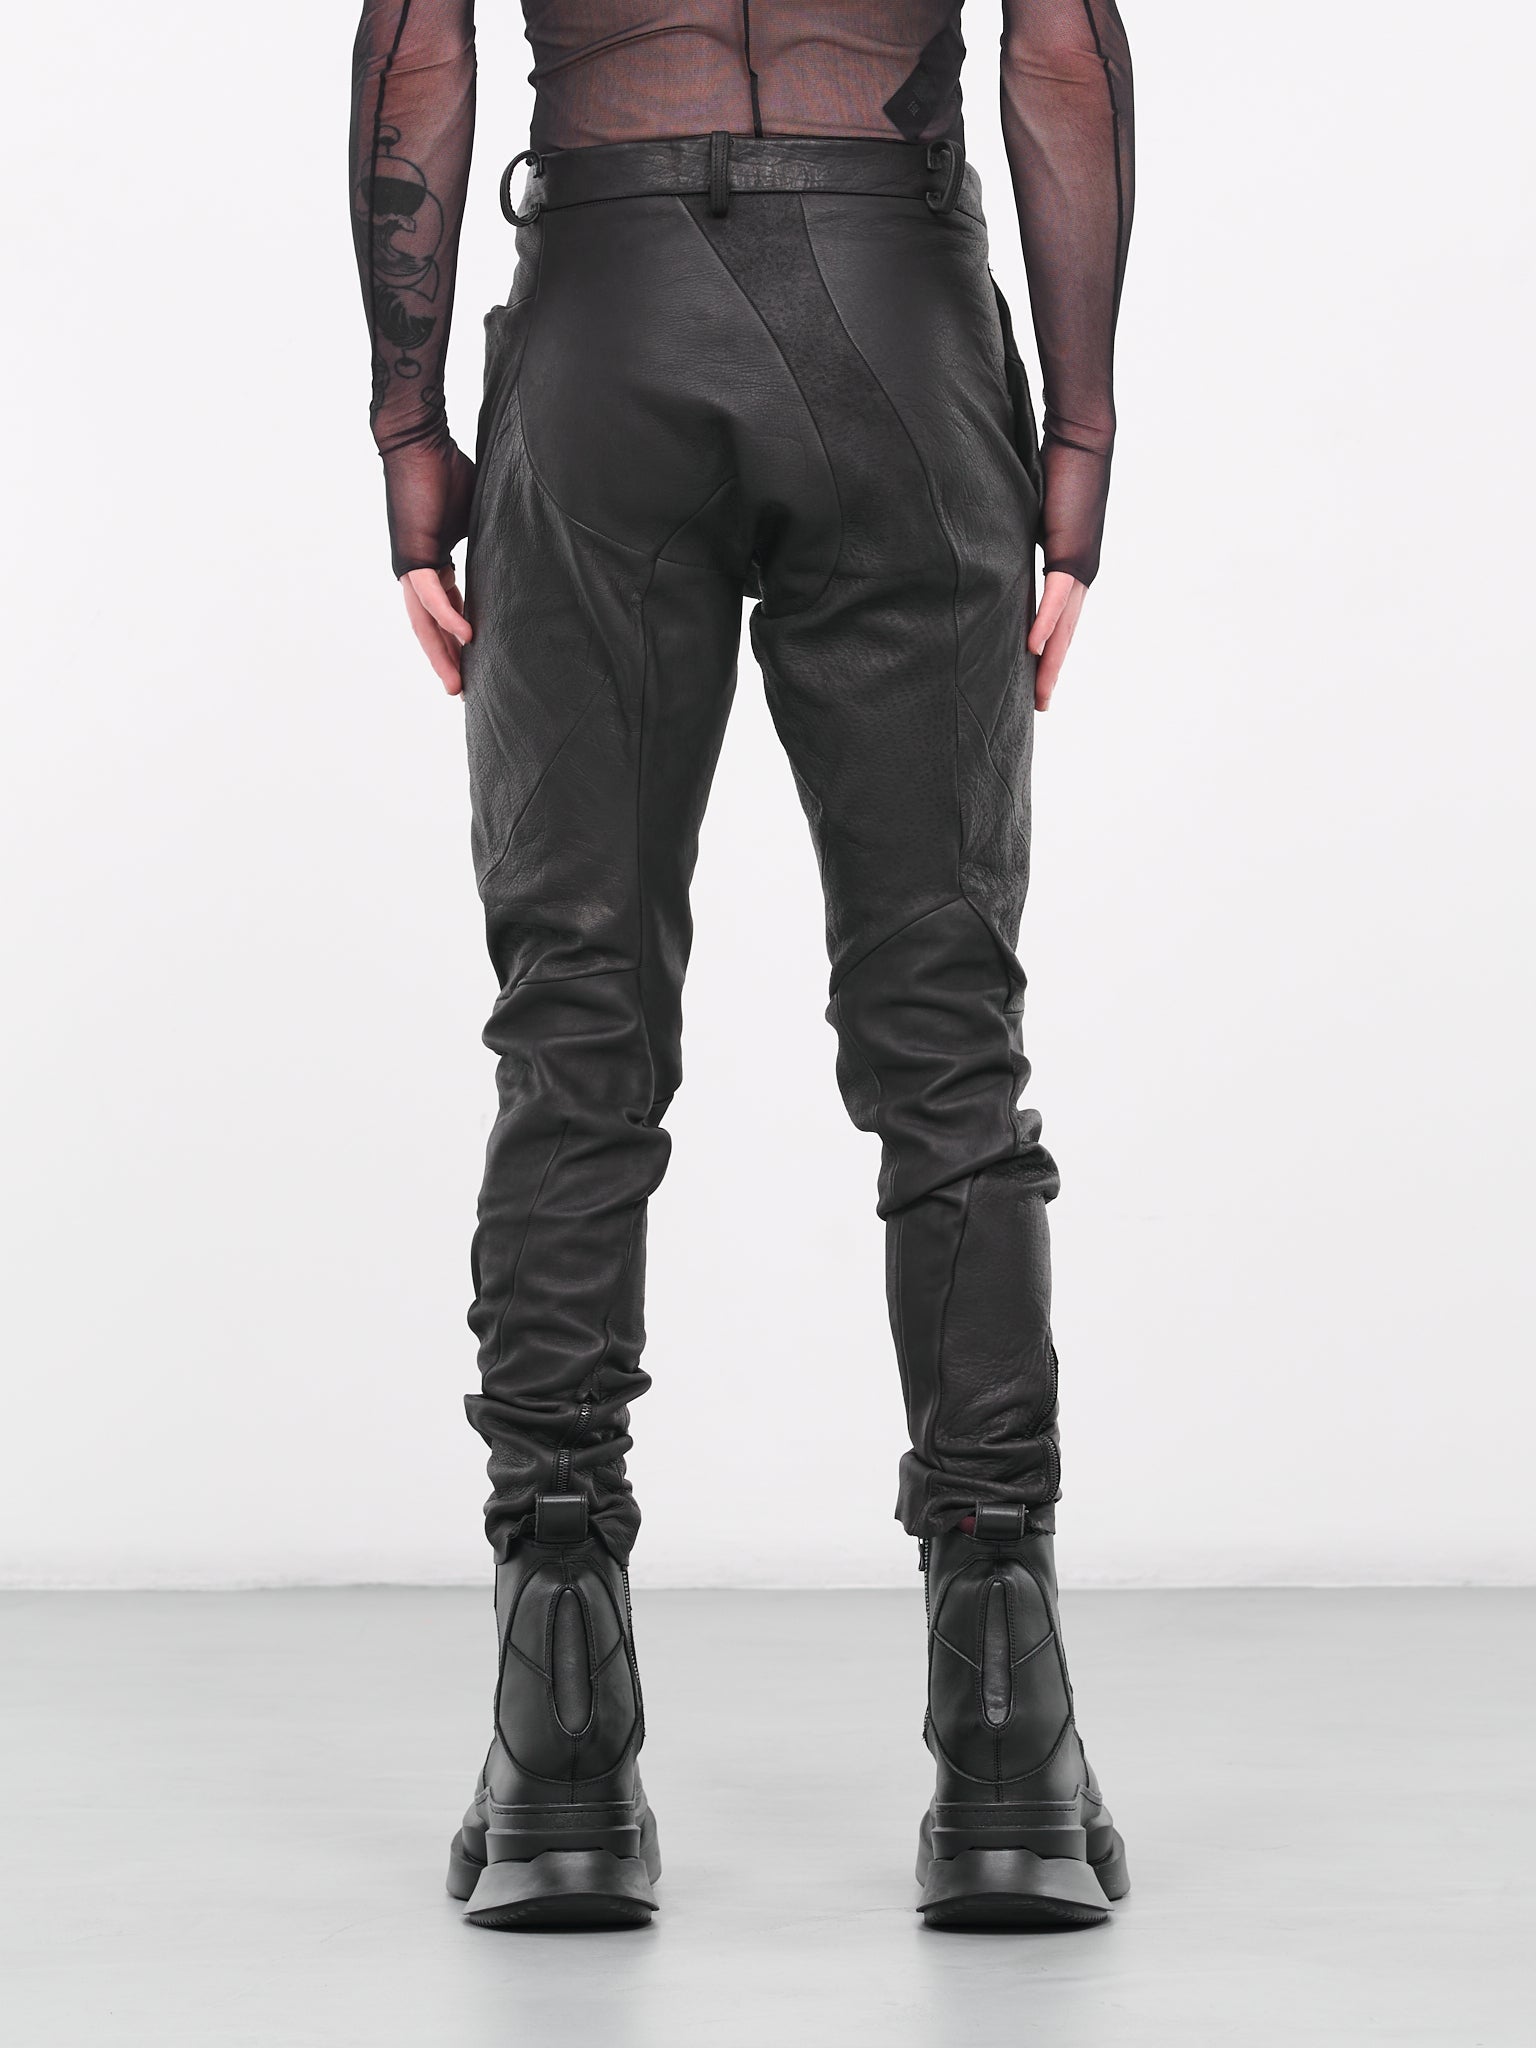 Distortion Fitted Long Pants (DISTORTION-FITTED-LONG-PANTS-B)